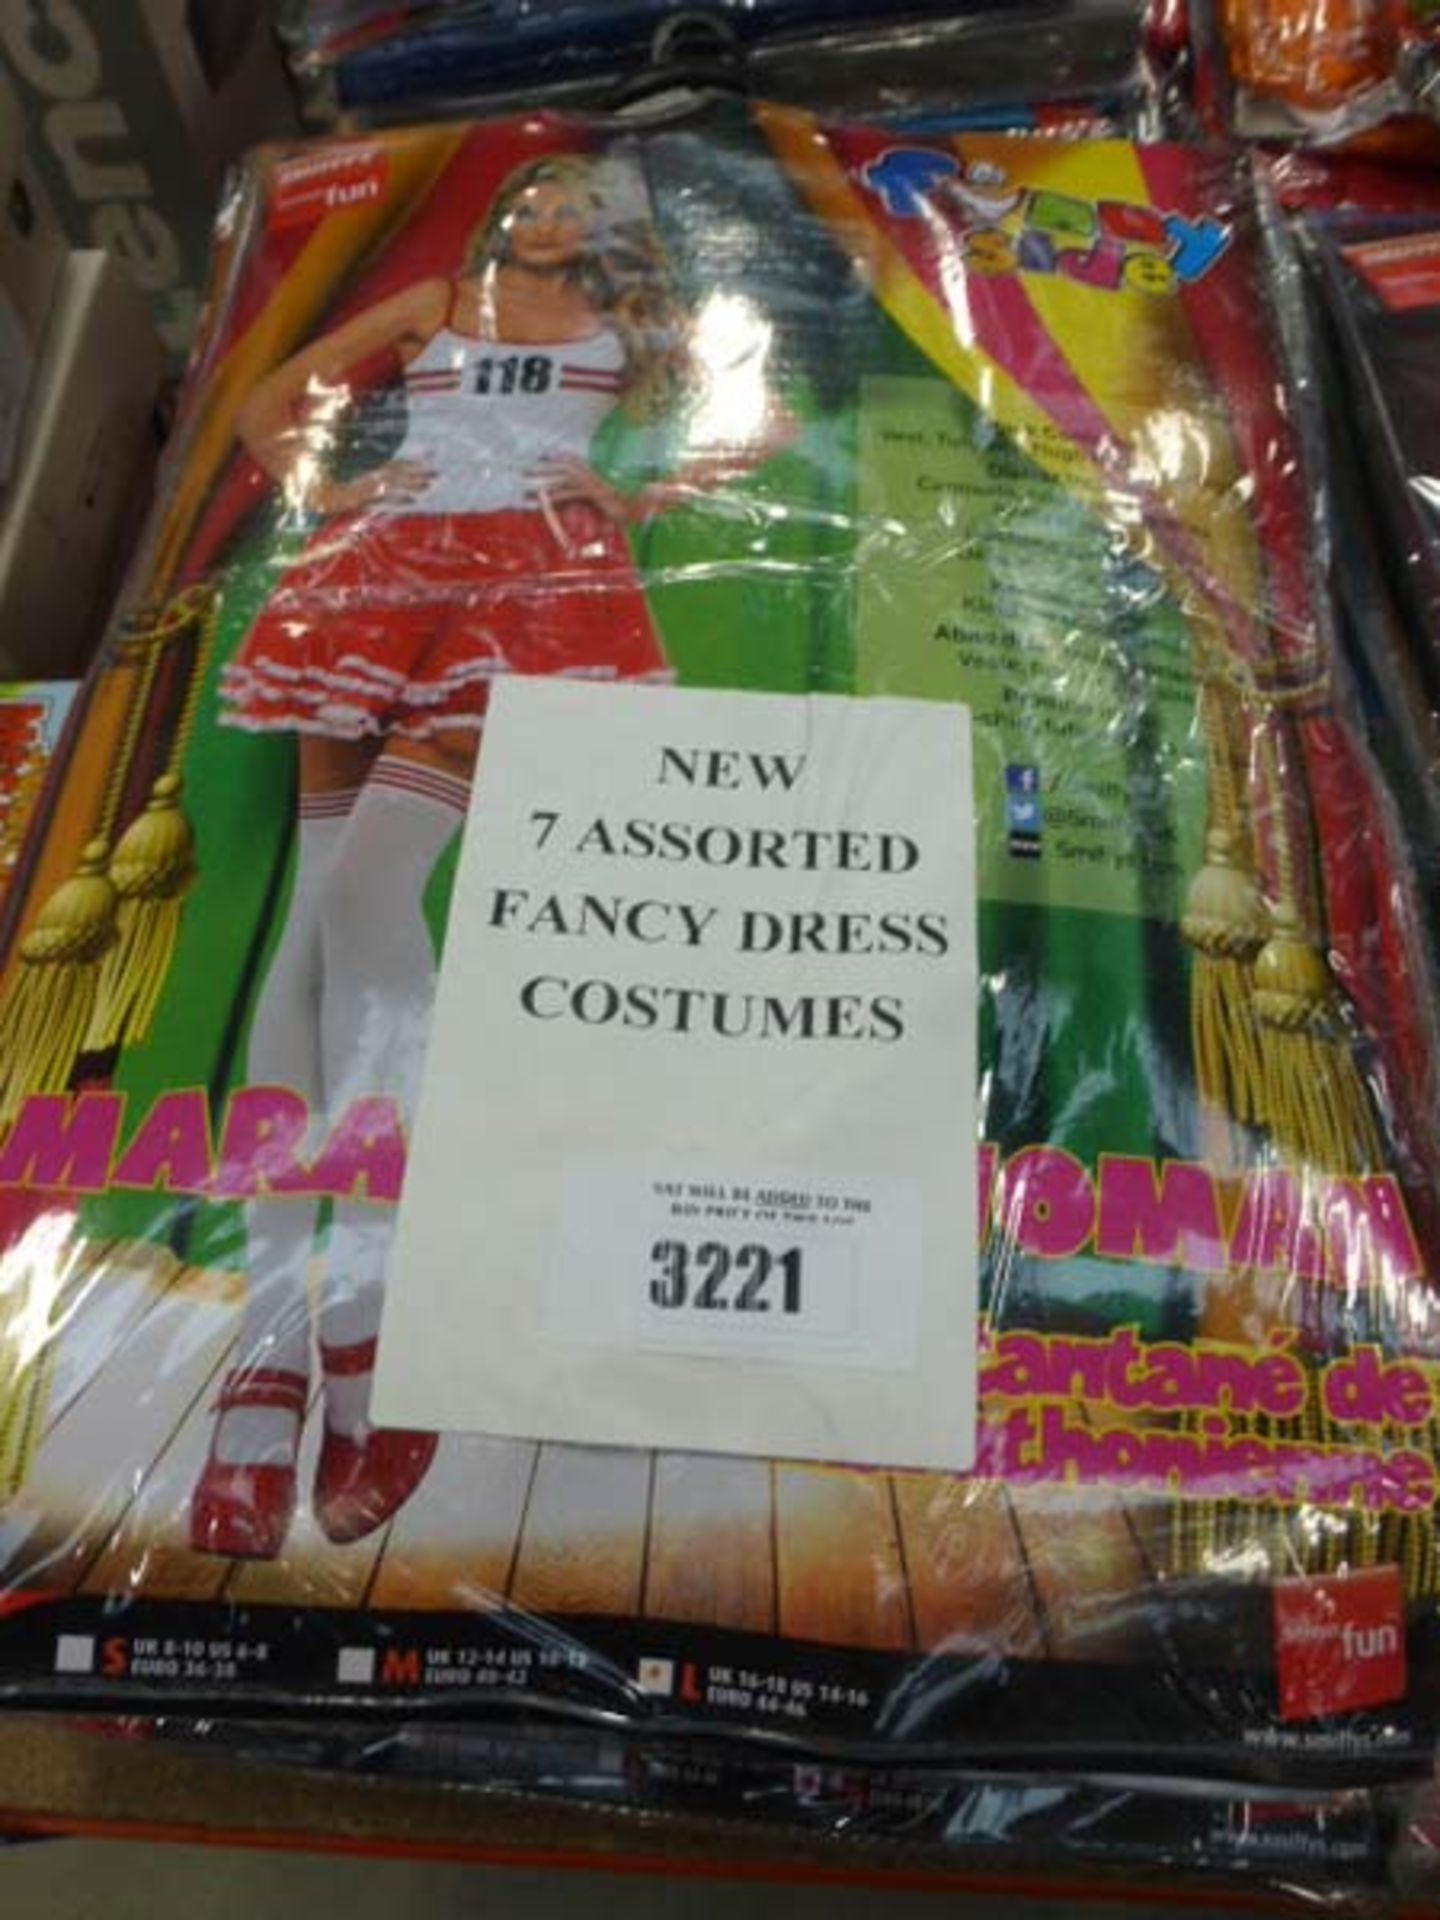 7 assorted fancy dress costumes